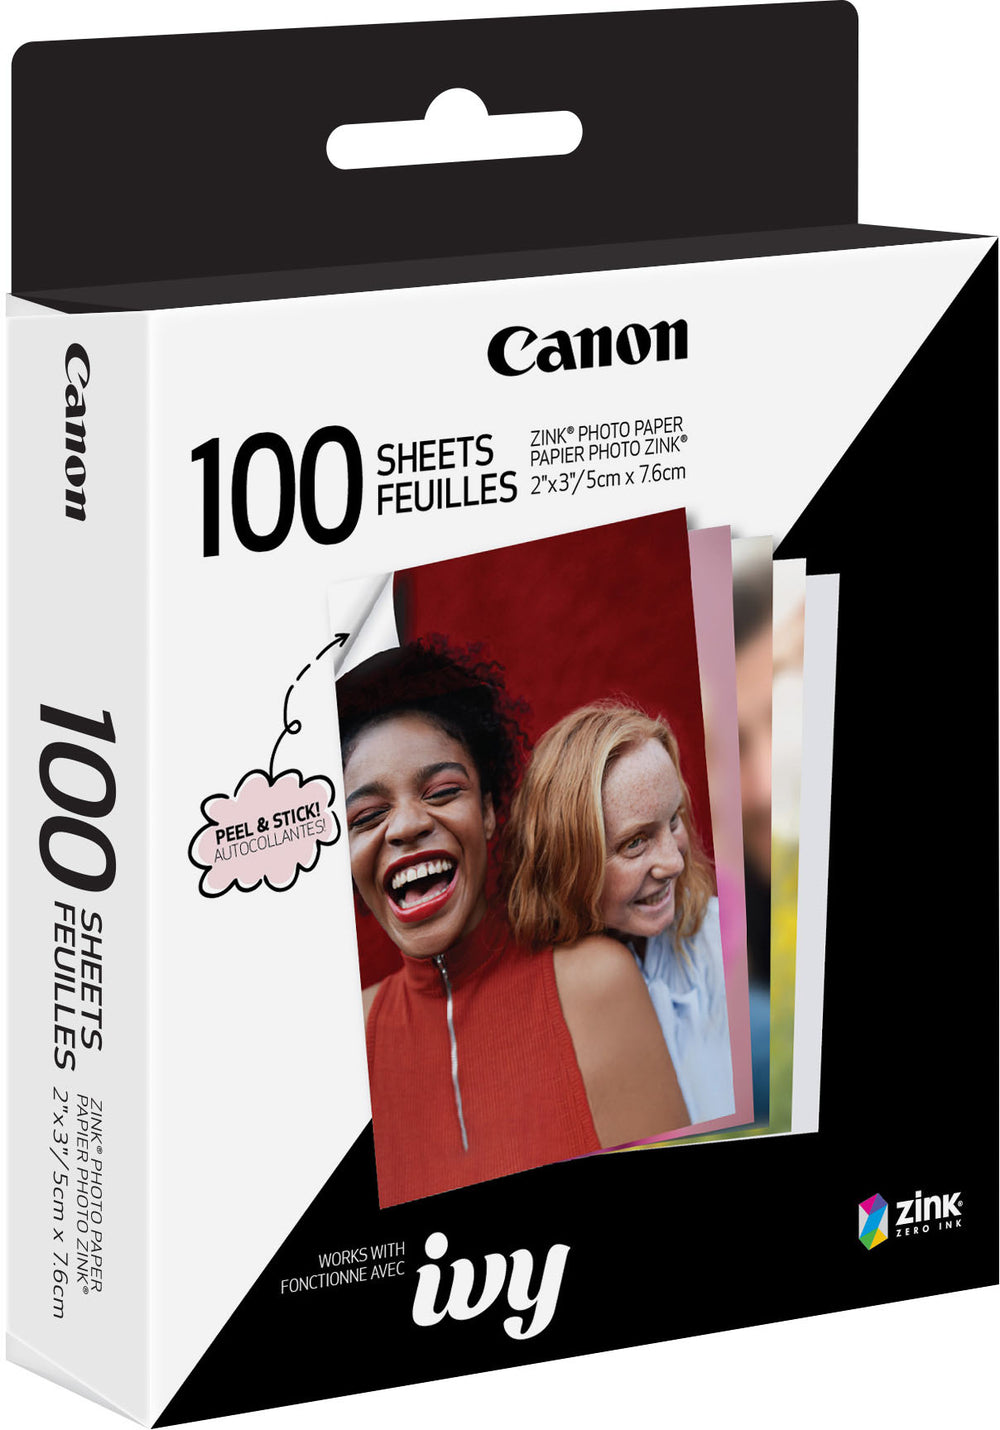 Canon - ZINK Glossy Photo 2" x 3" 100-Count Paper_1